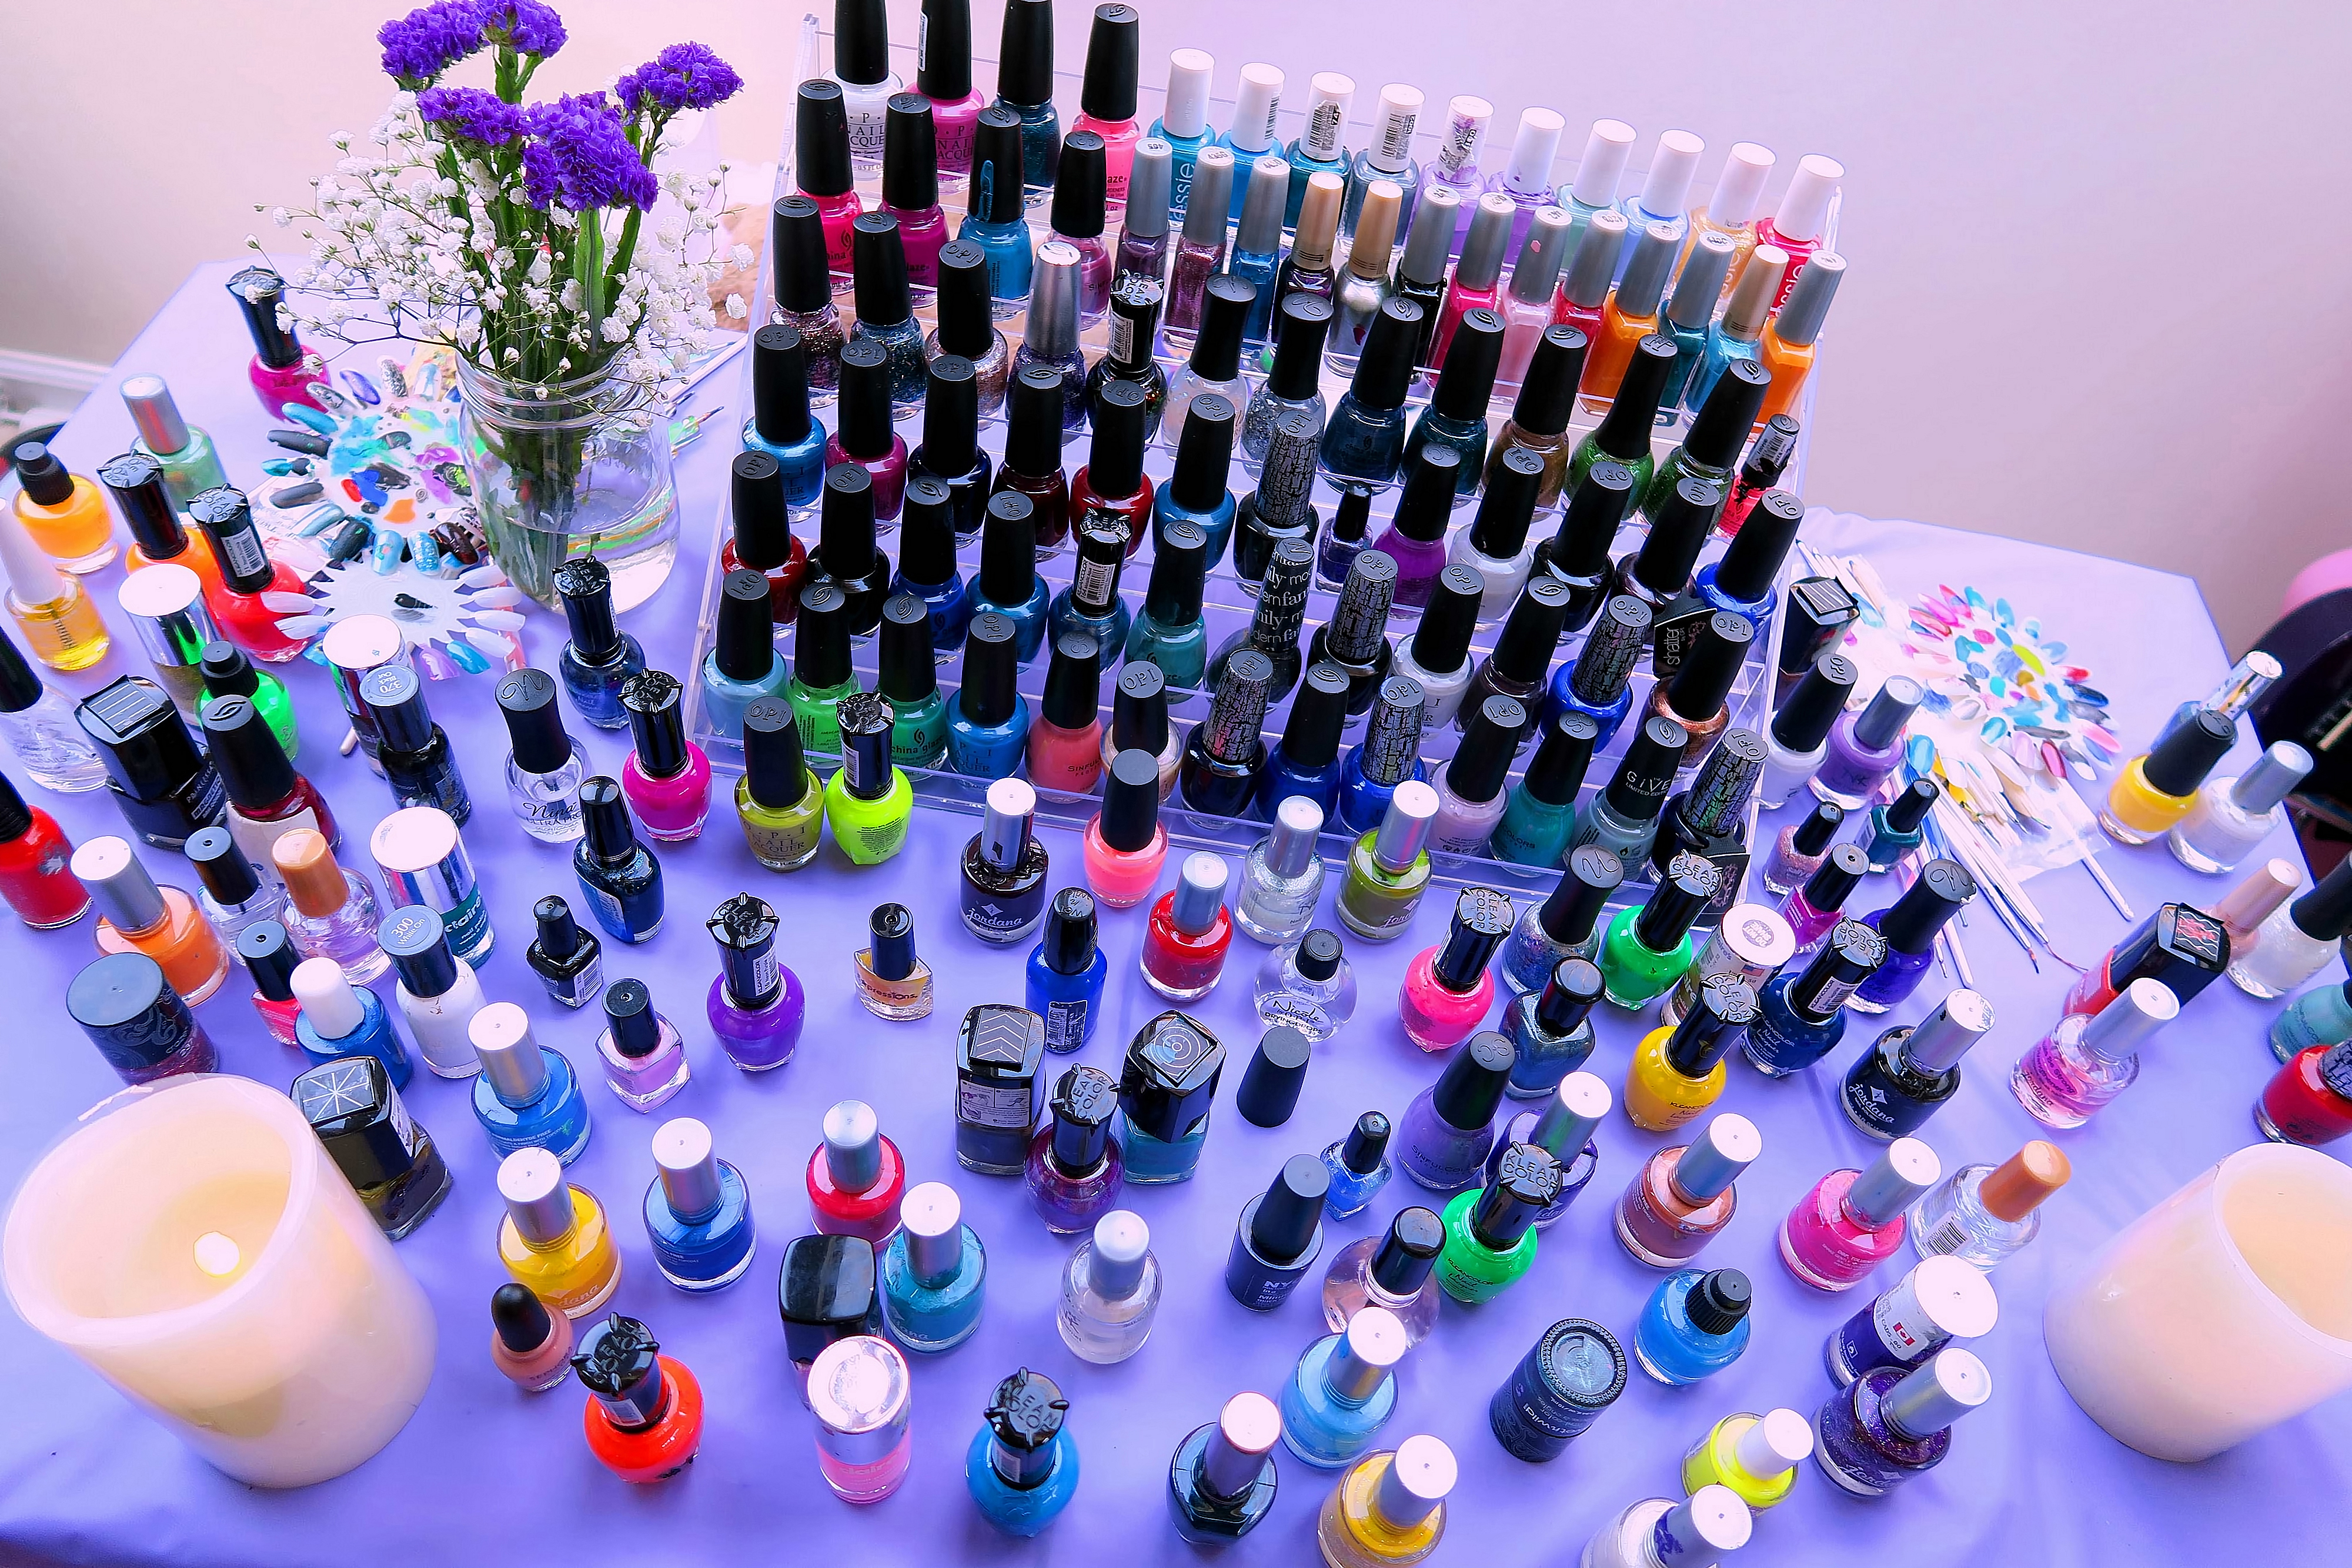 OPI, China Glaze, Piggy Paint, Essie, Milano, And Other Good Nail Polish Brands. 